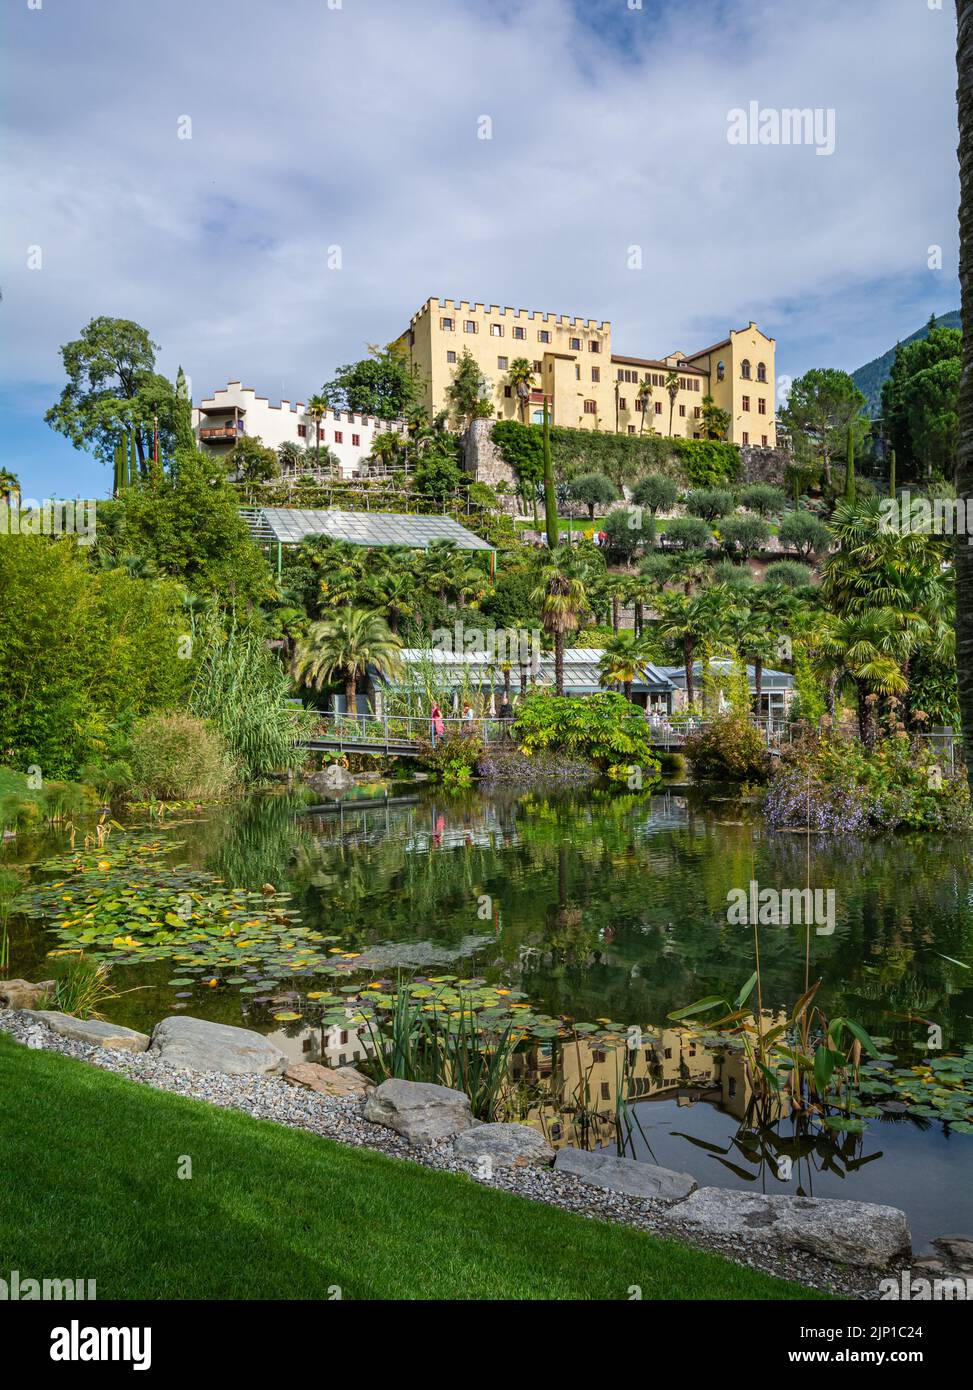 Merano’s Gardens of Trauttmansdorff Castle - A one of a kind botanical gardens located in Merano, South Tyrol, northern Italy - Merano in south Tyrol Stock Photo